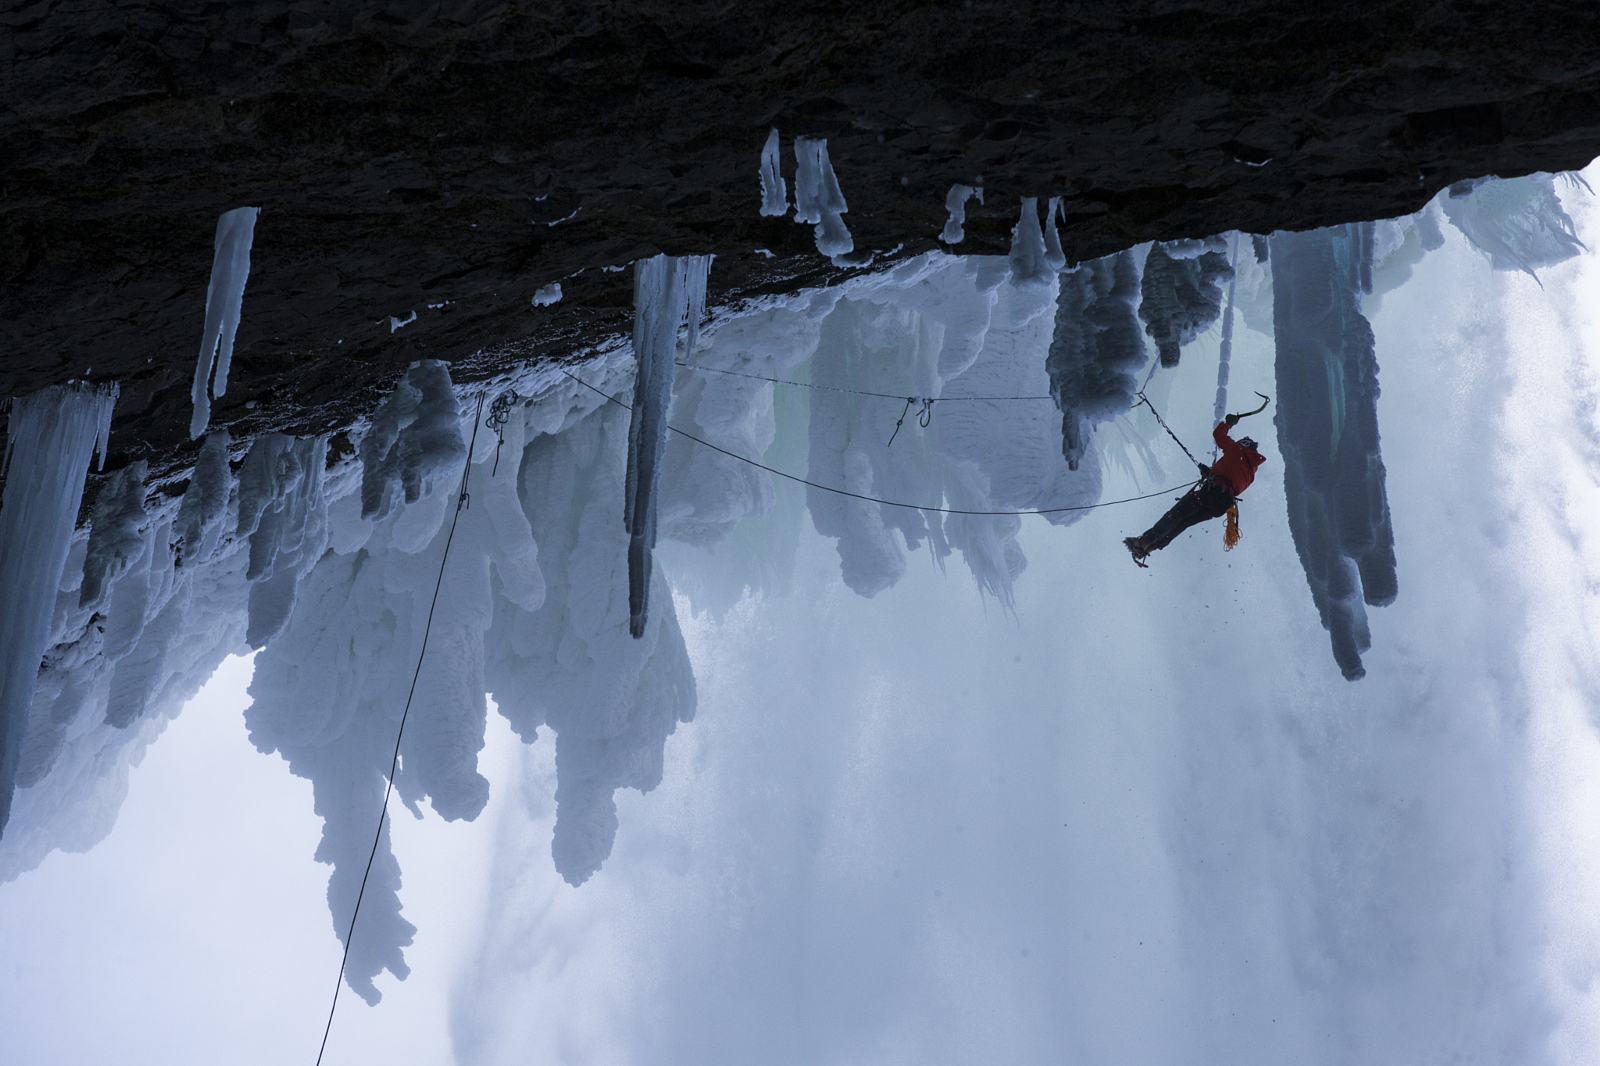 Rock Climbing Photography: What It Takes To Capture Epic Climbs